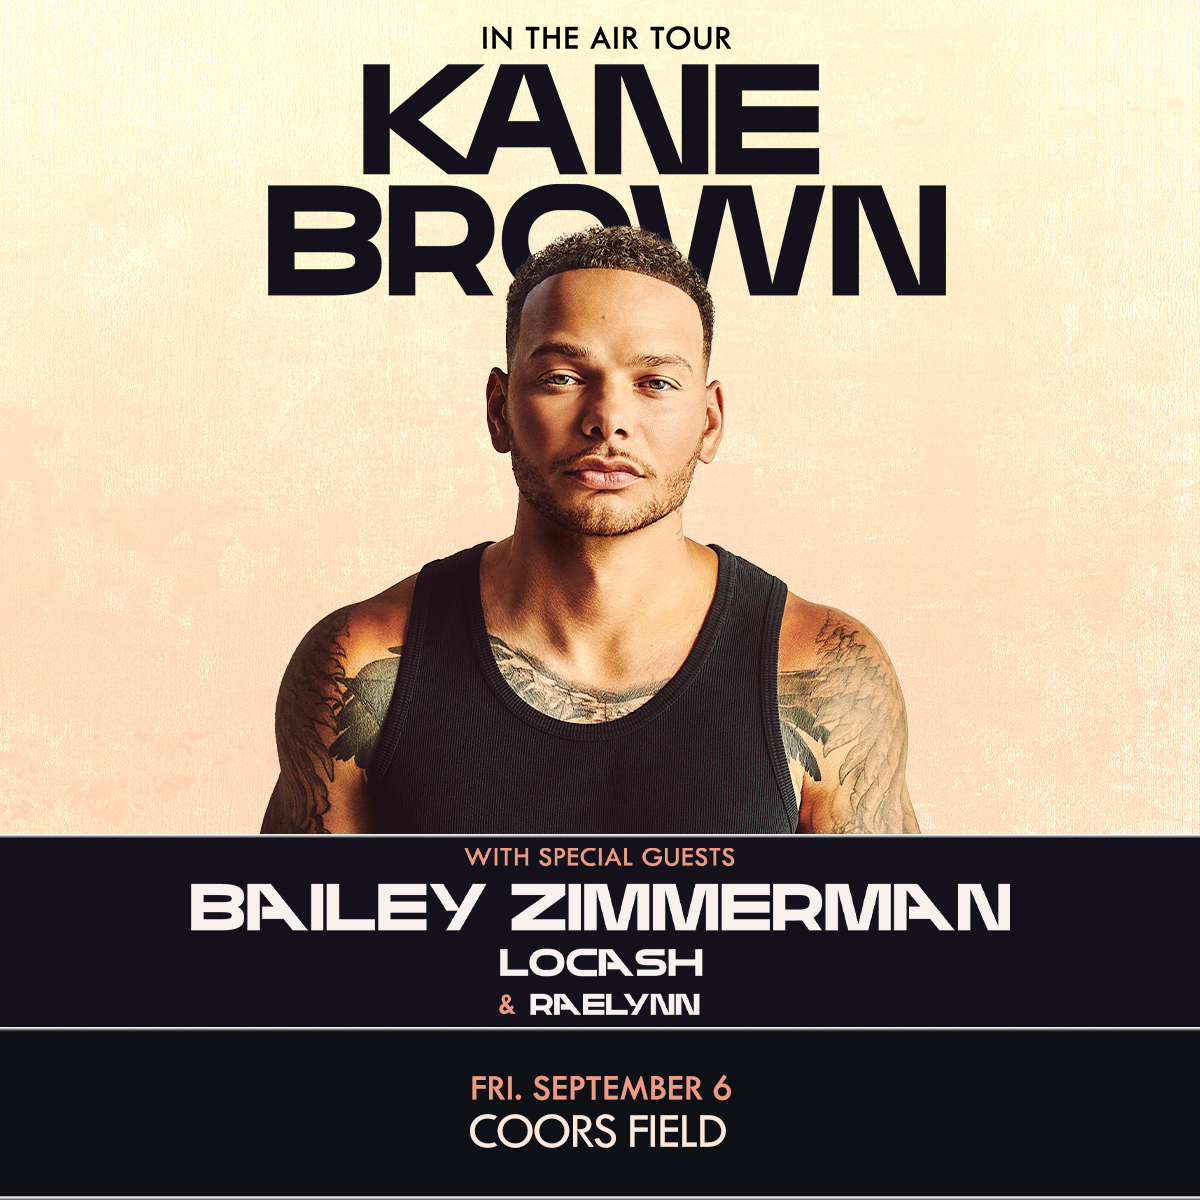 Kane Brown at Coors Field